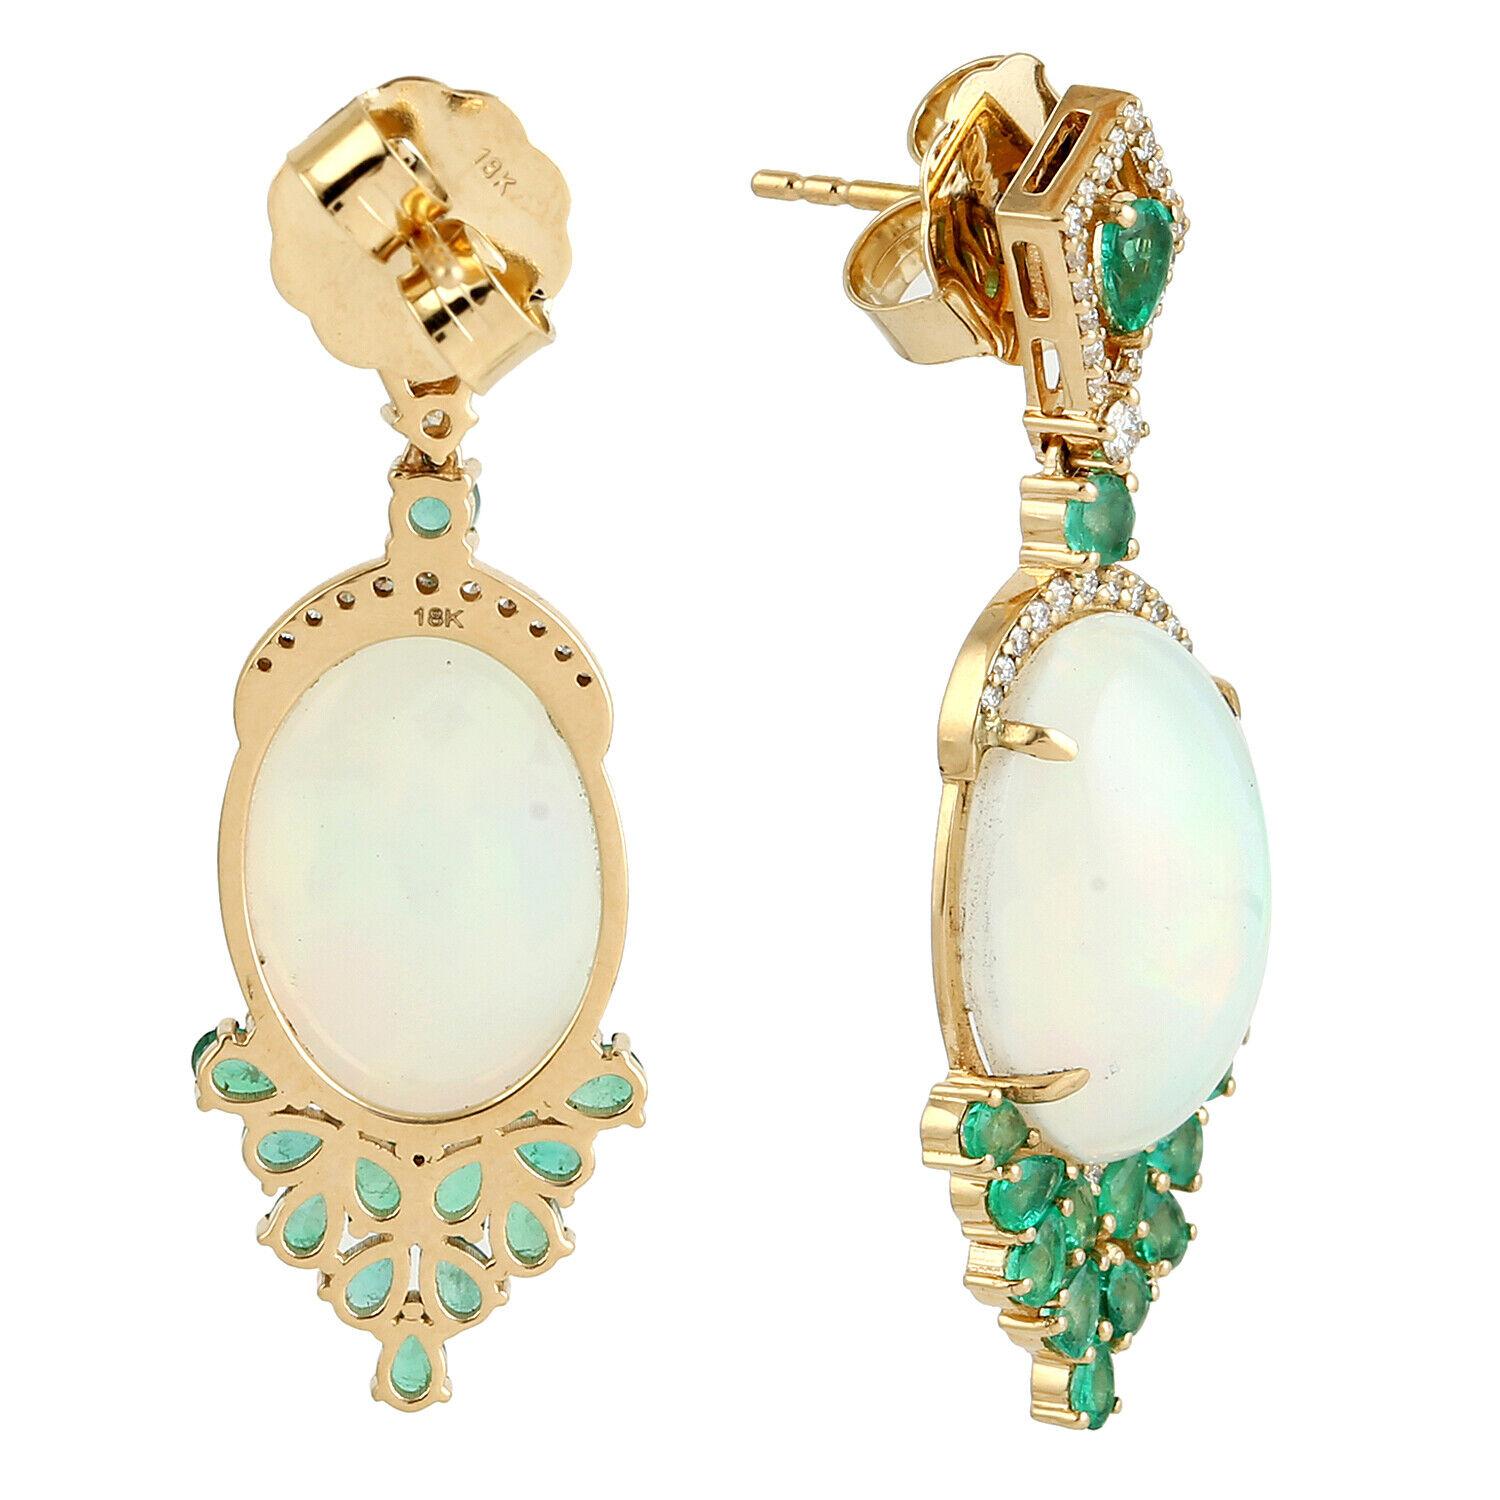 Cast in 14 karat gold. These earrings are handset in 12.48 carats Ethiopian opal, emerald and .34 carats of sparkling diamonds. 

FOLLOW MEGHNA JEWELS storefront to view the latest collection & exclusive pieces. Meghna Jewels is proudly rated as a